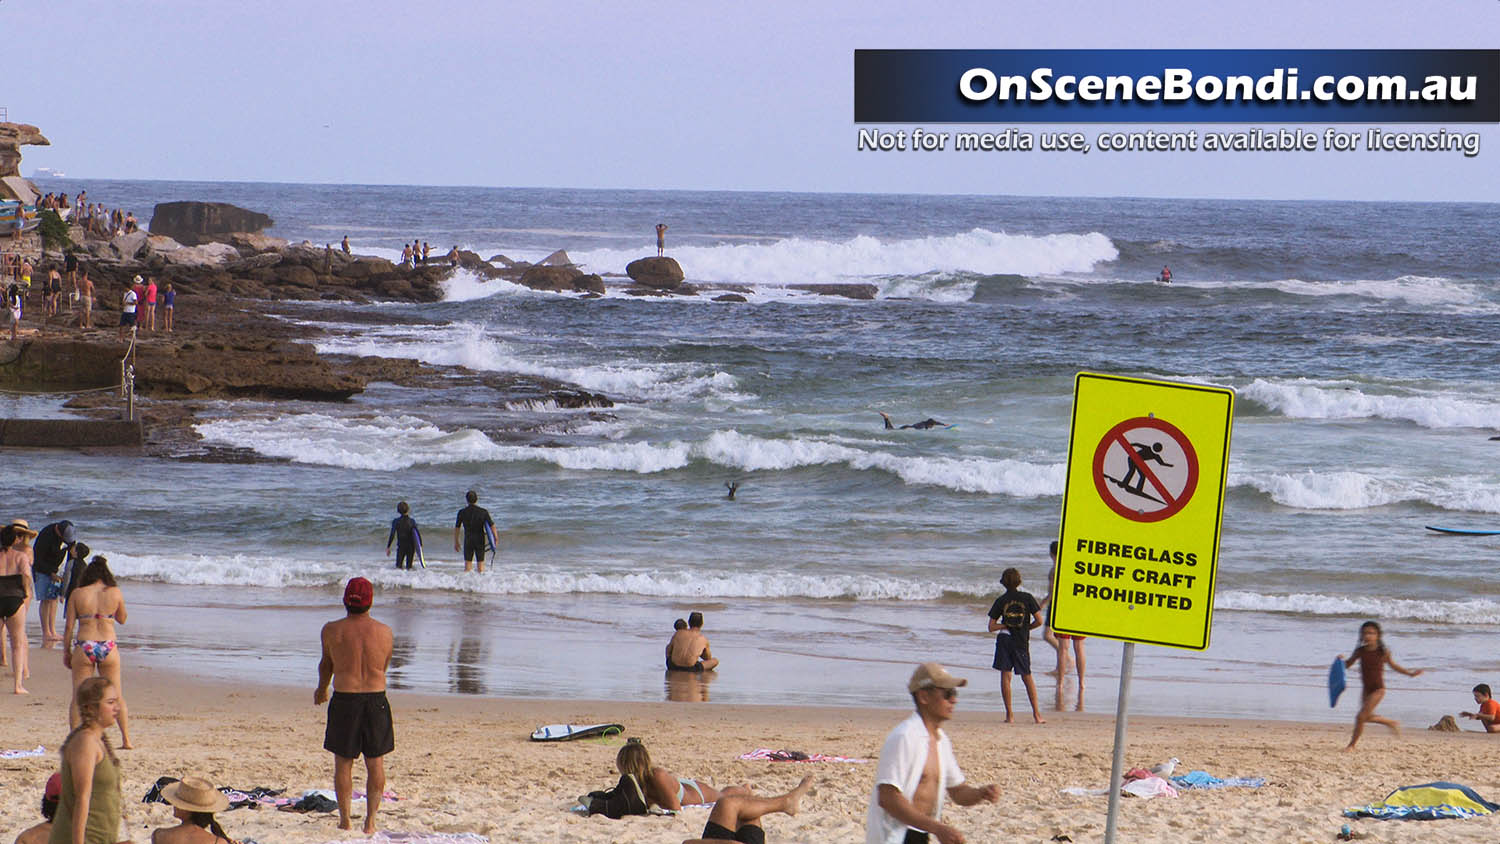 Man dies after being washed away by wave and drowning in Bondi Beach, NSW